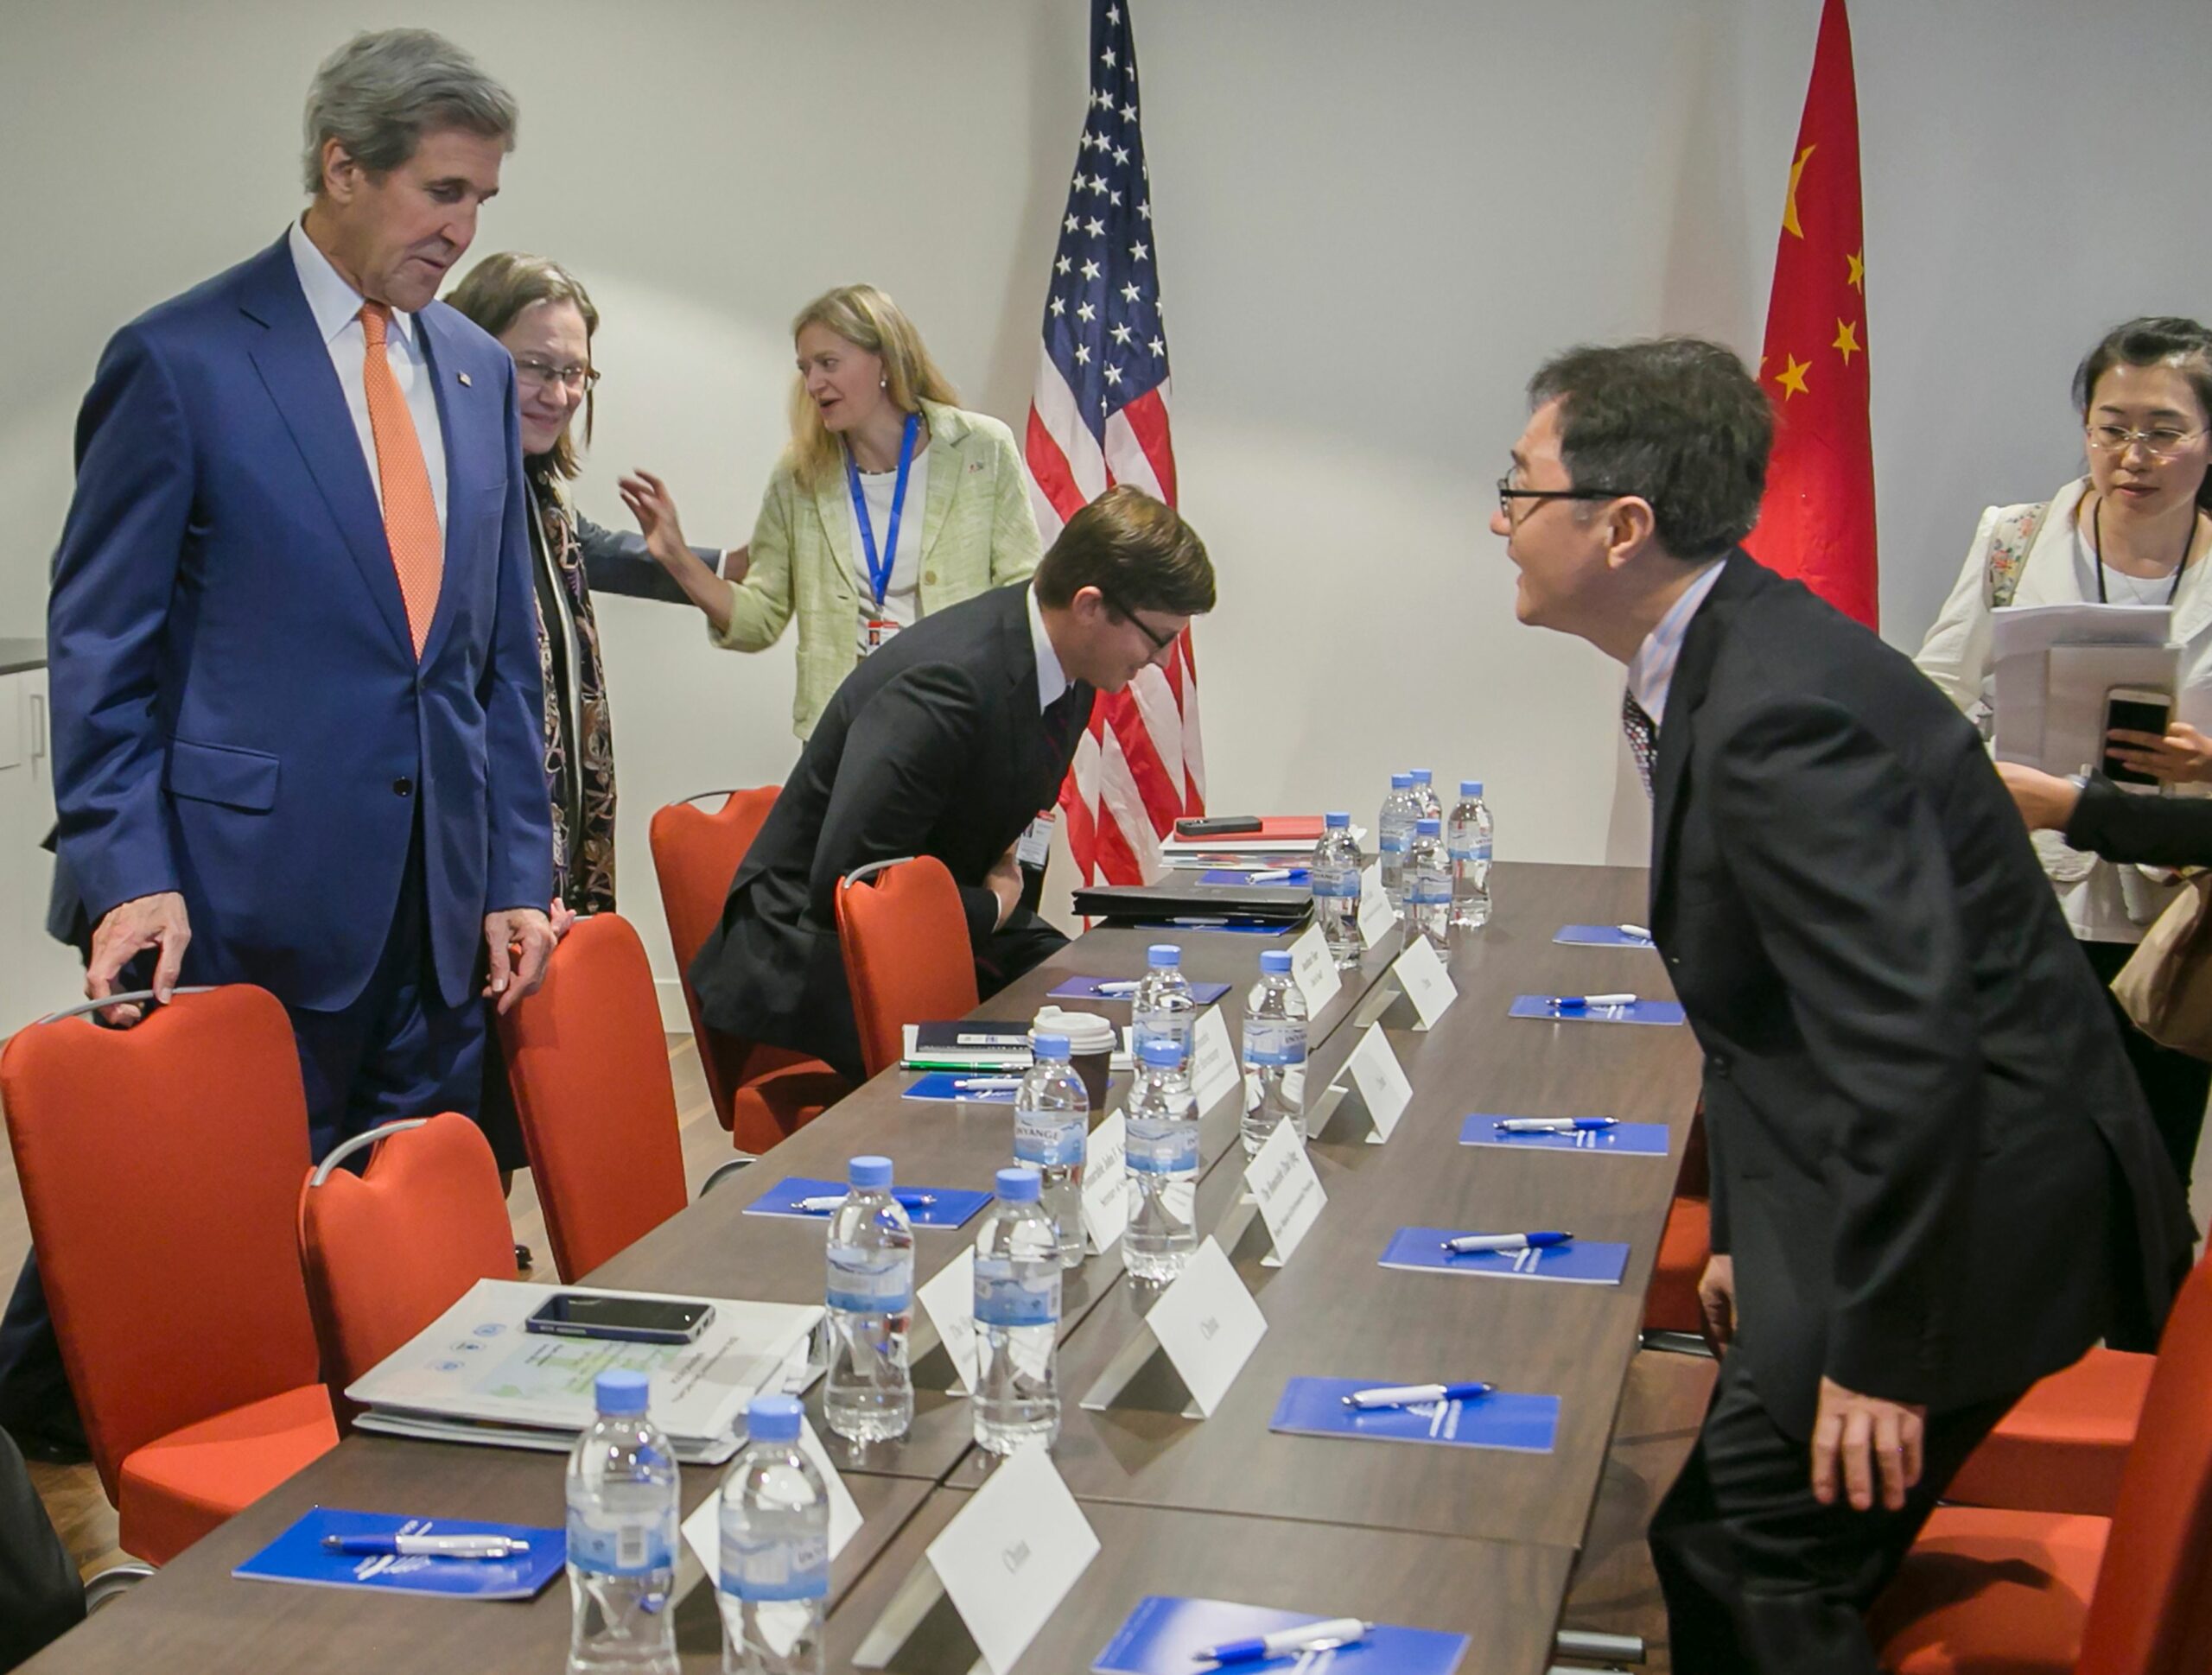 Former Secretary of State John Kerry and Chinese Deputy Minister of Environmental Protection Zhai Qing arrive for a bilateral meeting on the sidelines of the 28th Meeting of the Parties to the Montreal Protocol in Kigali on October 14, 2016. Credit: Cyril Ndegeya/AFP via Getty Images